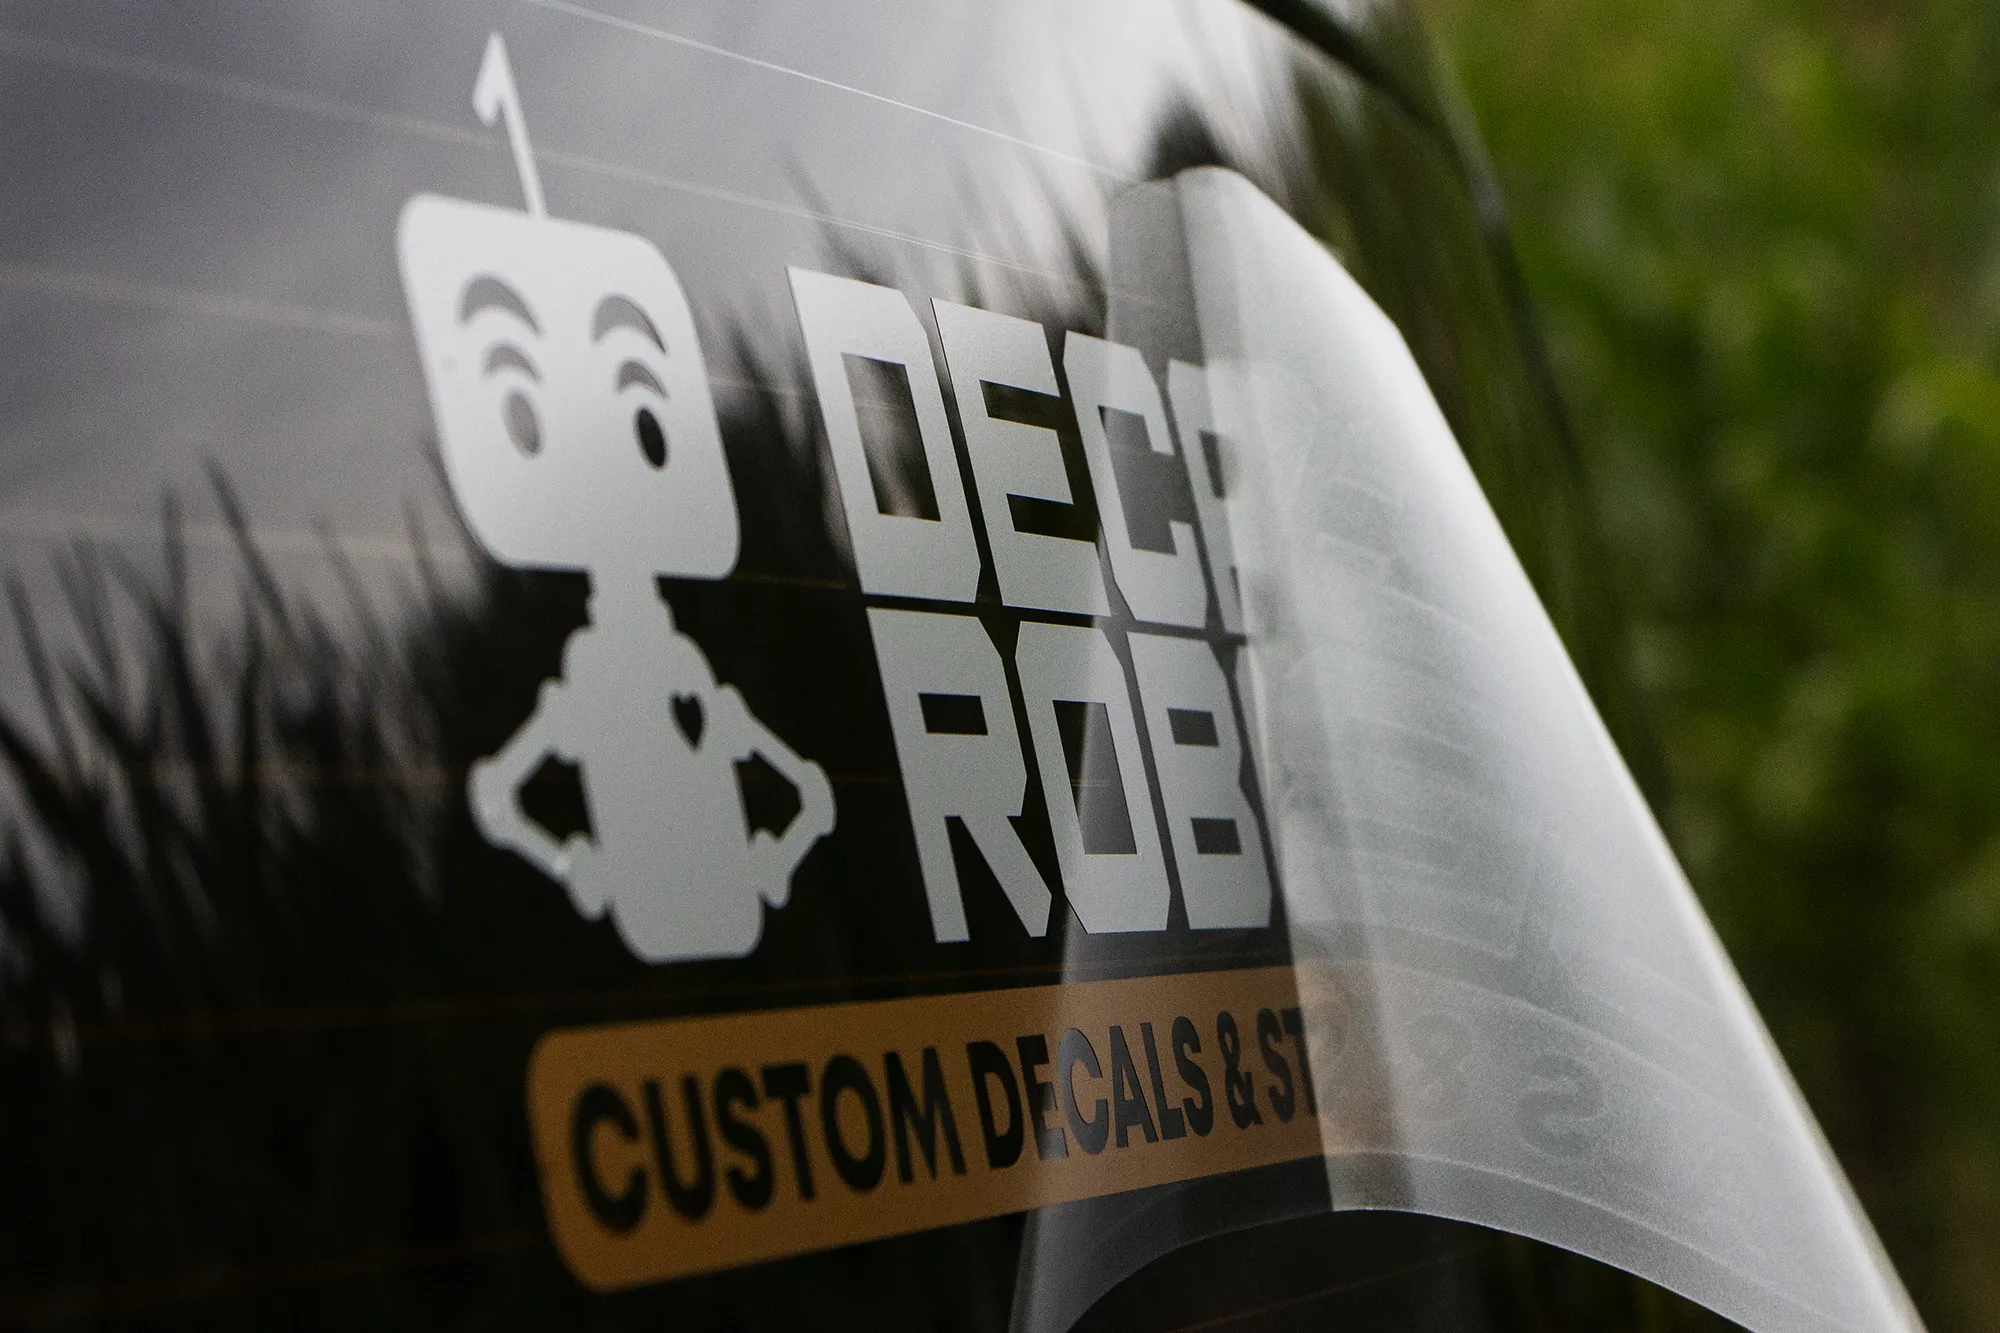 Vinyl decal of Decal Robot logo being applied to a windshield.